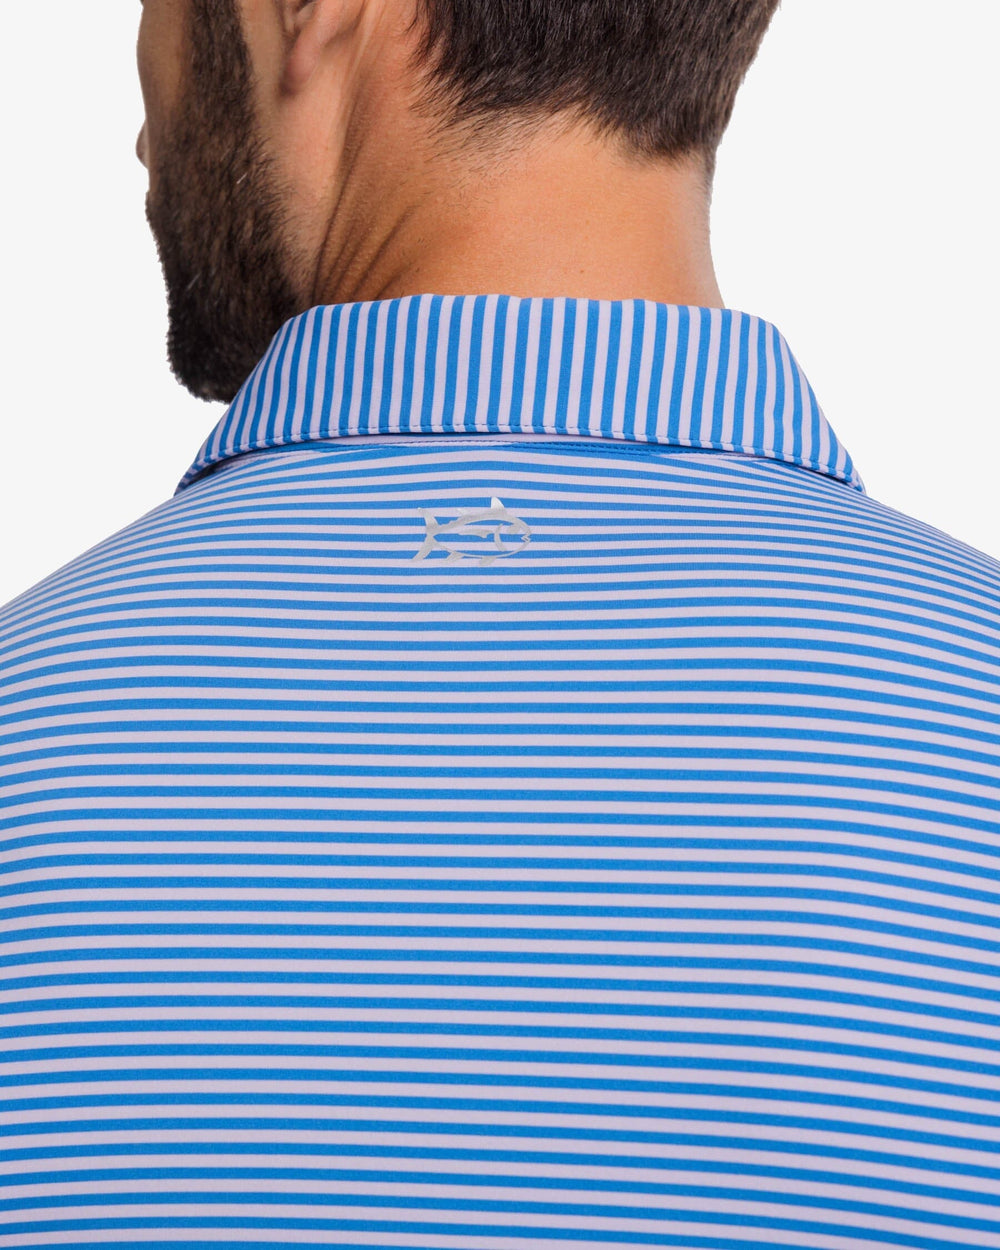 The yoke view of the Southern Tide Shores Stripe brrr eeze Performance Polo Shirt by Southern Tide - Light Purple